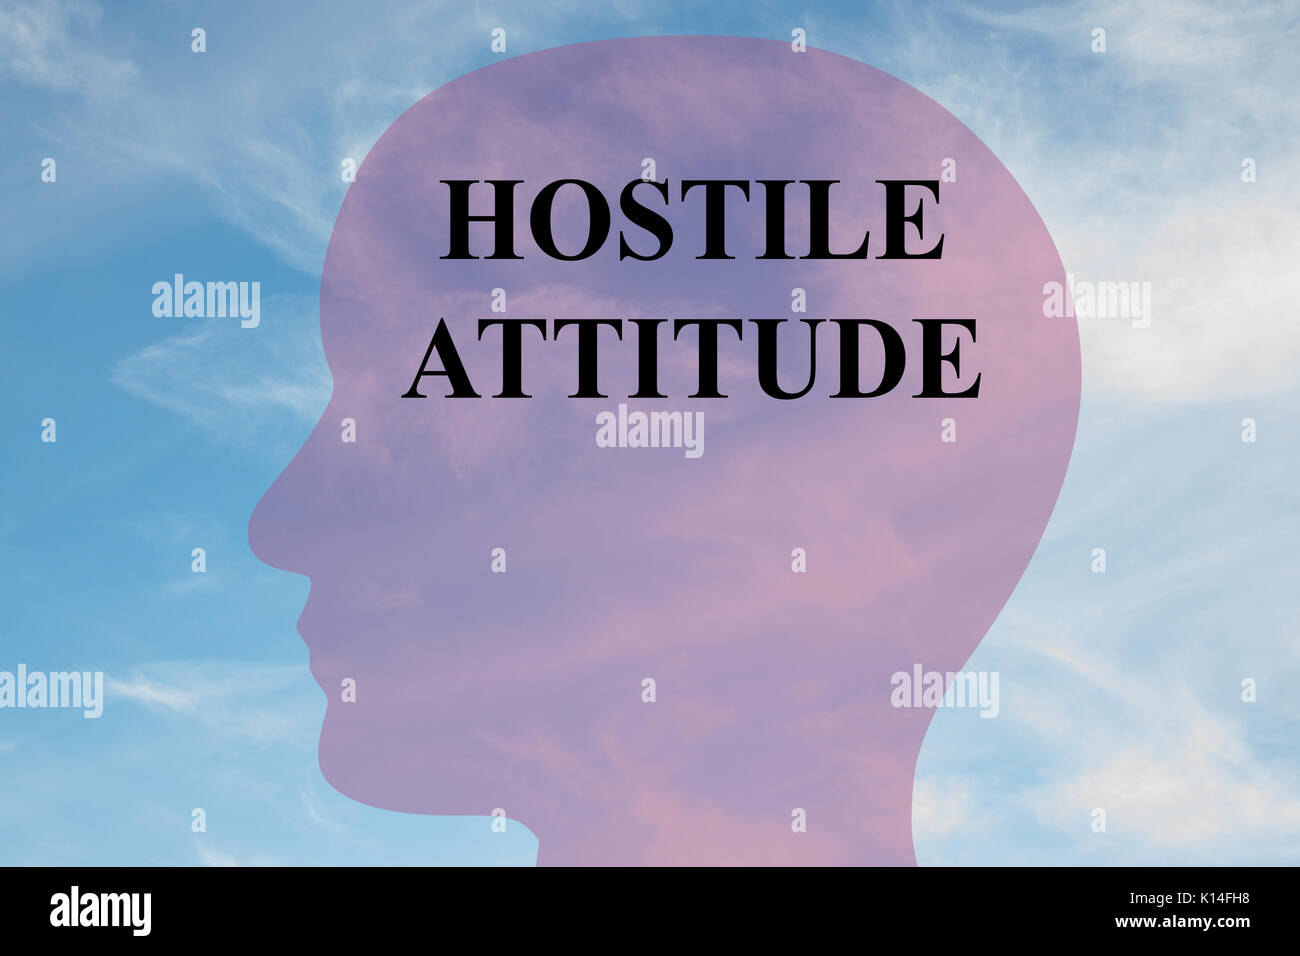 Render illustration of 'HOSTILE ATTITUDE' title on head silhouette, with cloudy sky as a background. Stock Photo